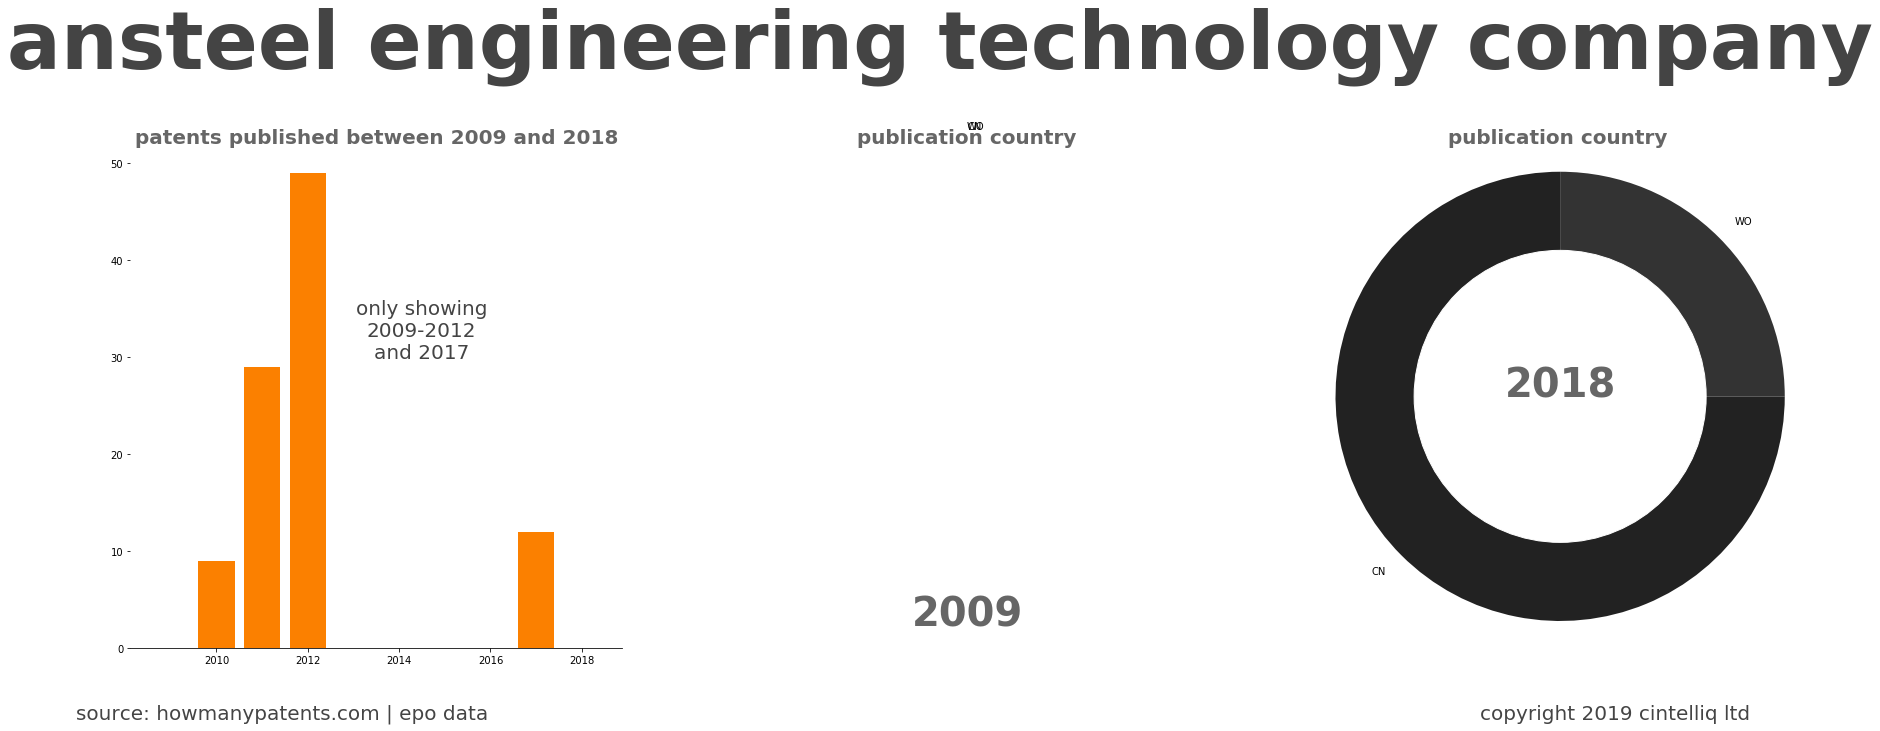 summary of patents for Ansteel Engineering Technology Company